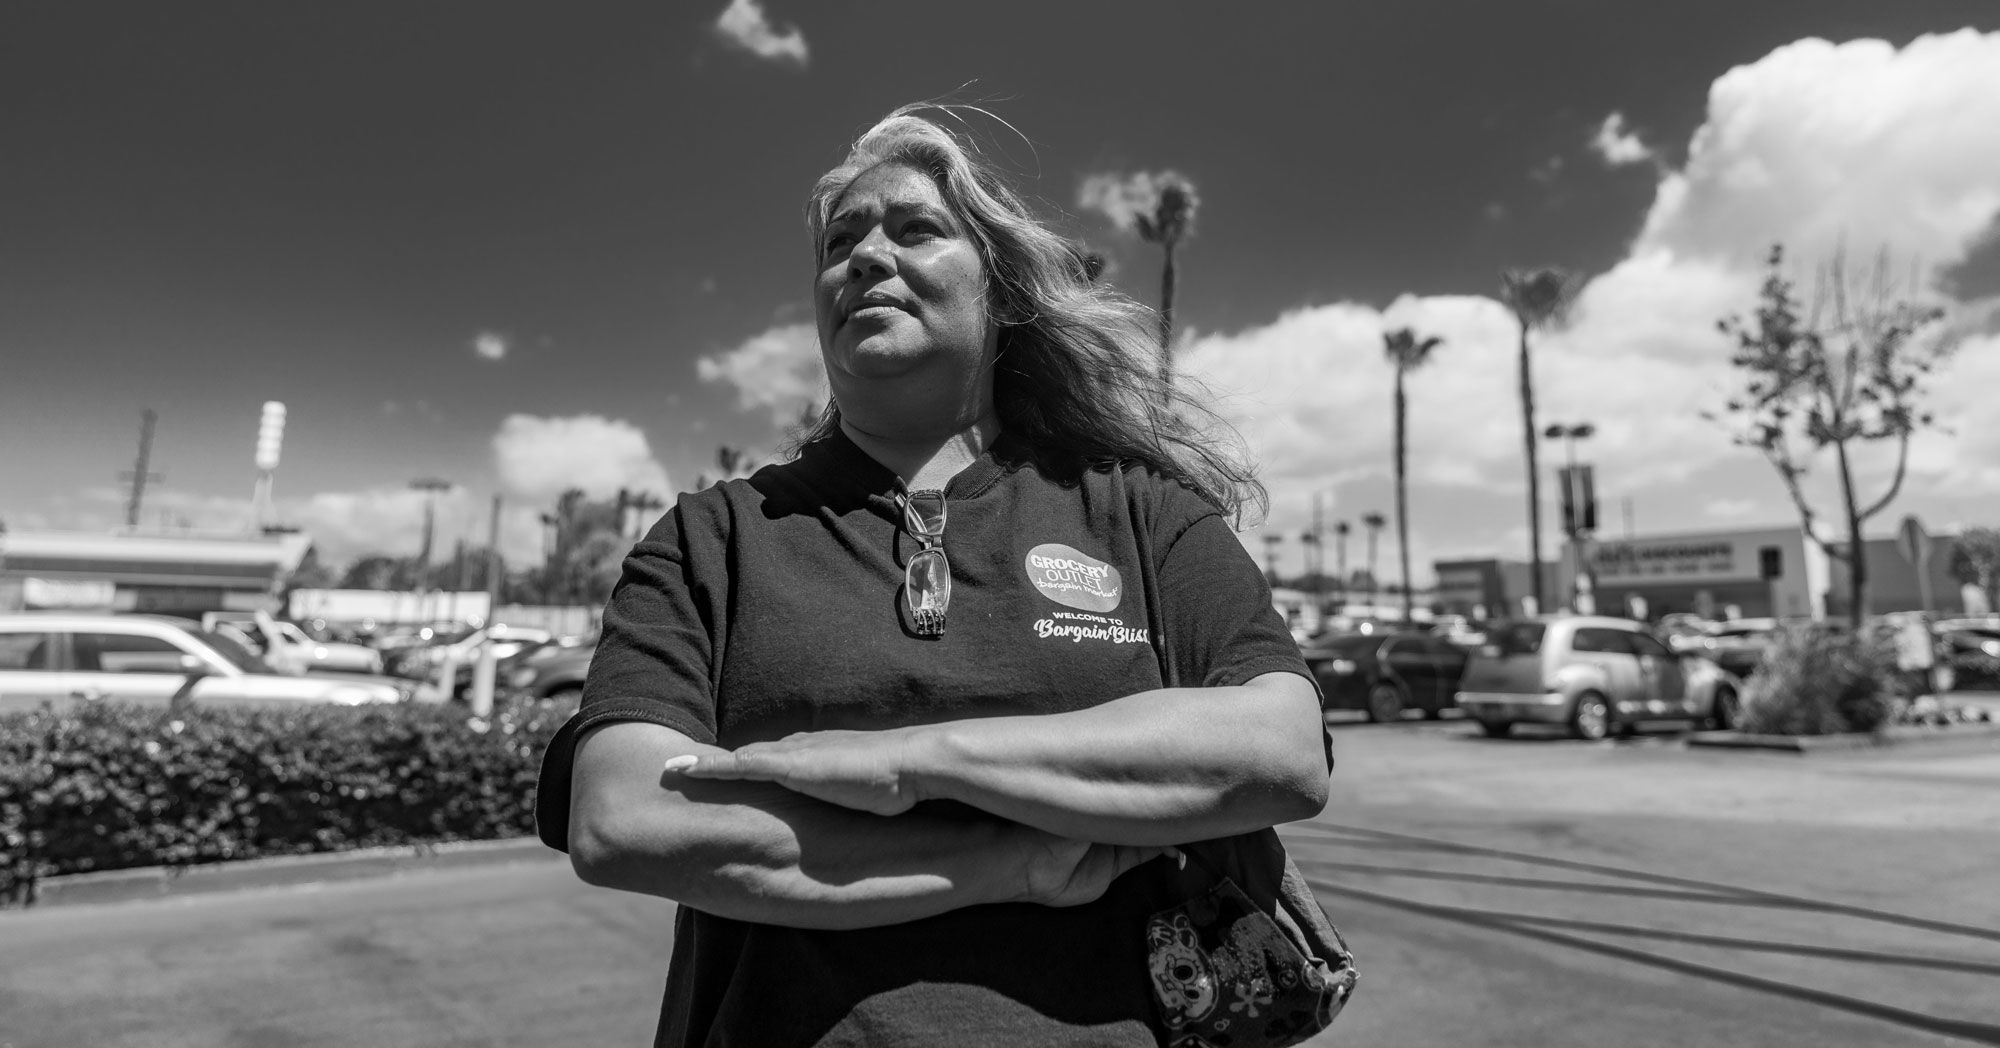 Inglewood Grocery Outlet employee, Patricia White